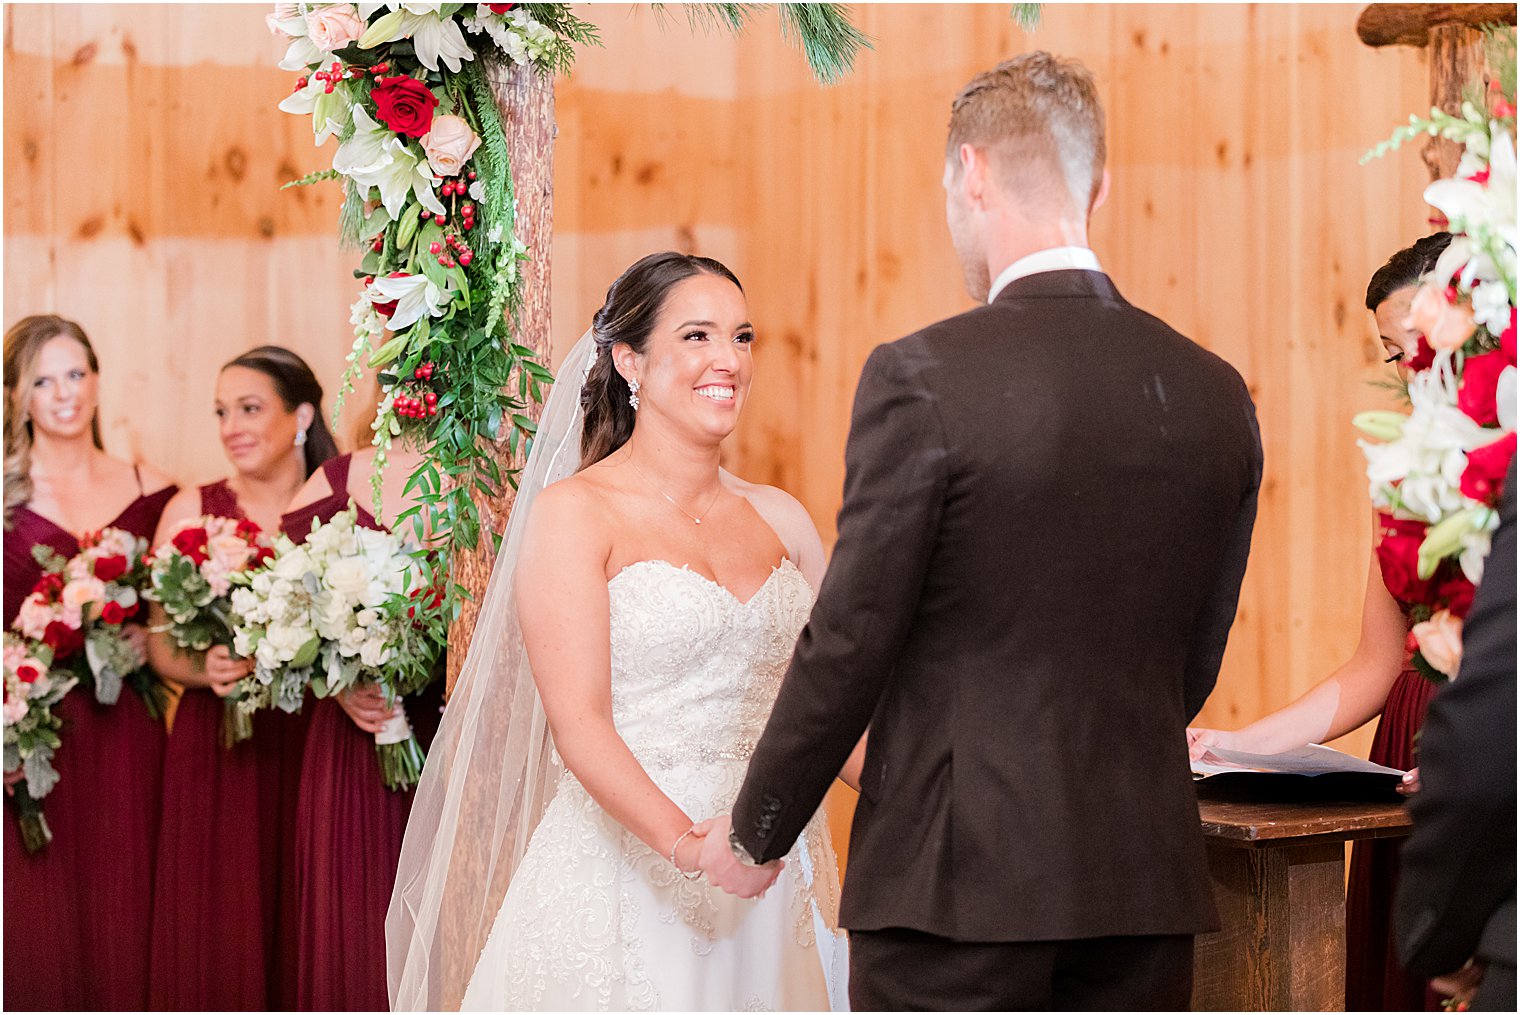 newlyweds exchange vows during wedding ceremony in farmhouse